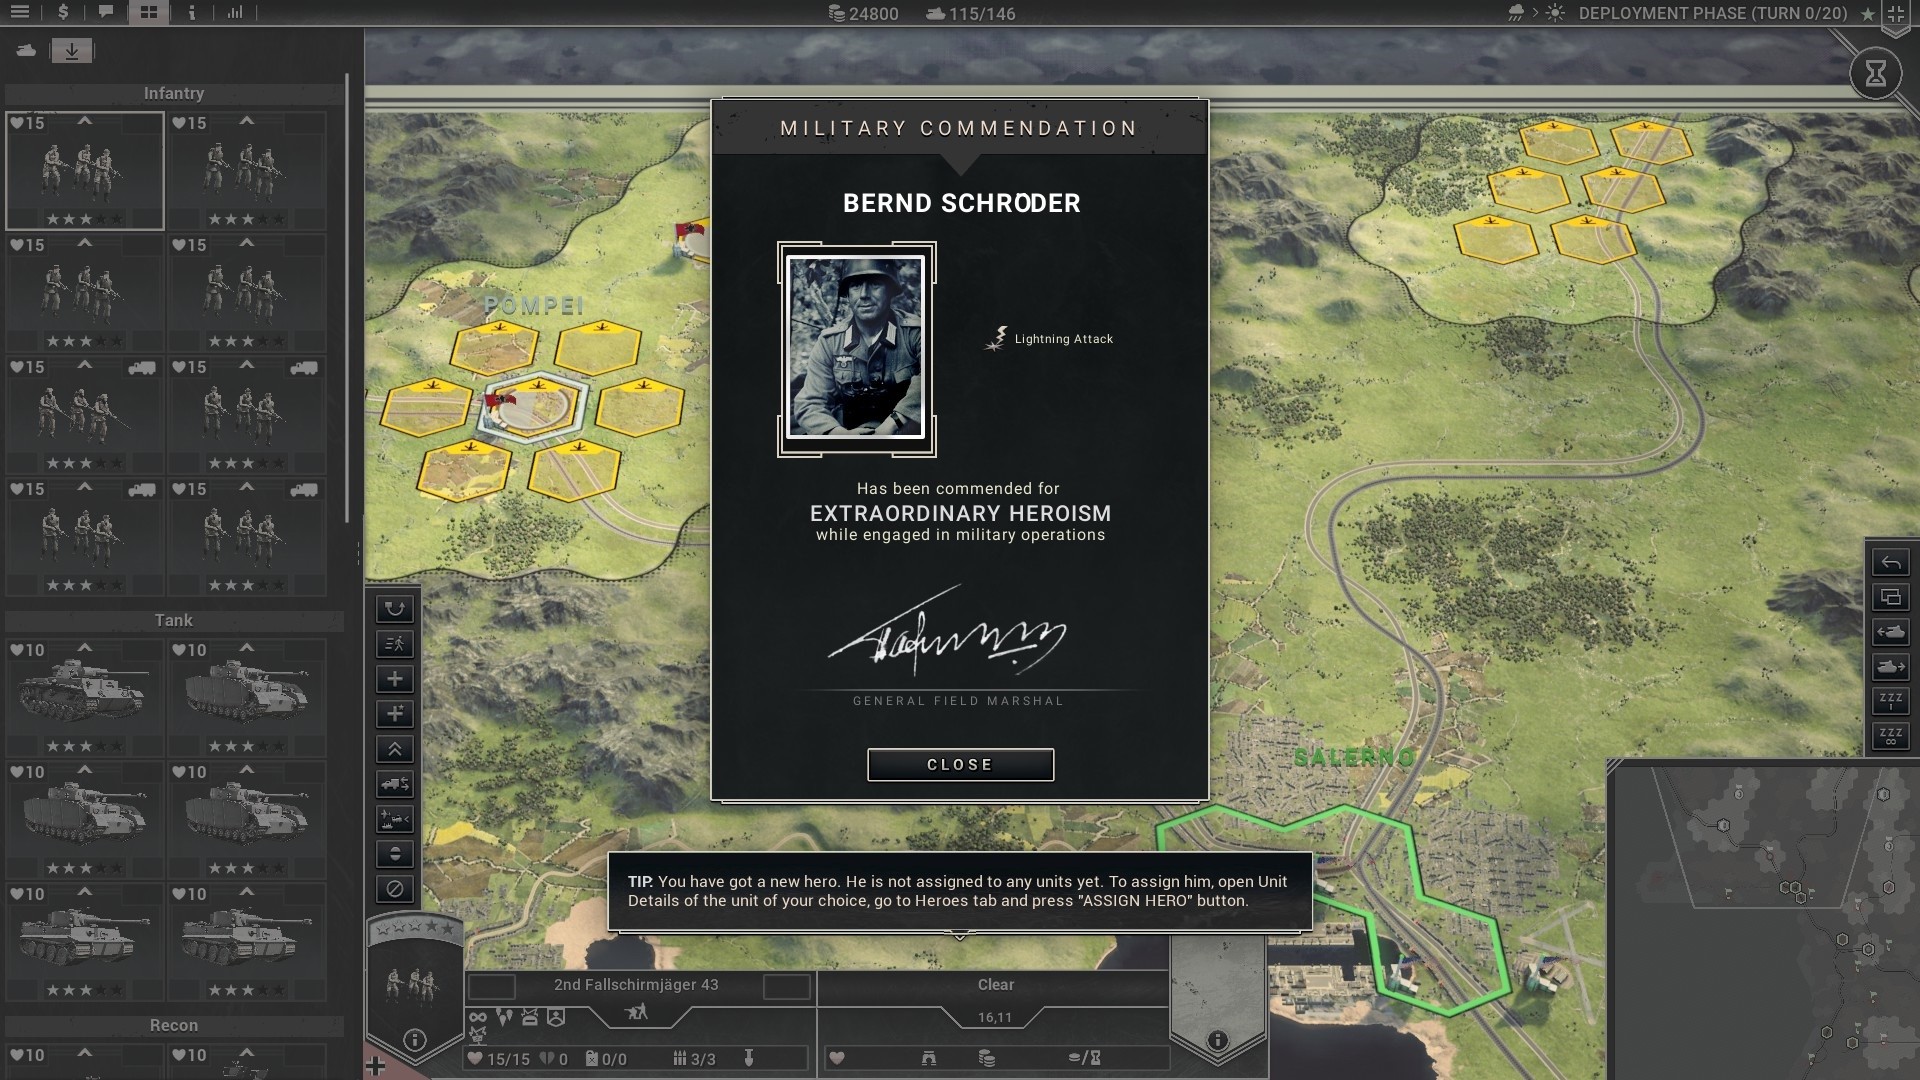 Panzer Corps 2 Free Download